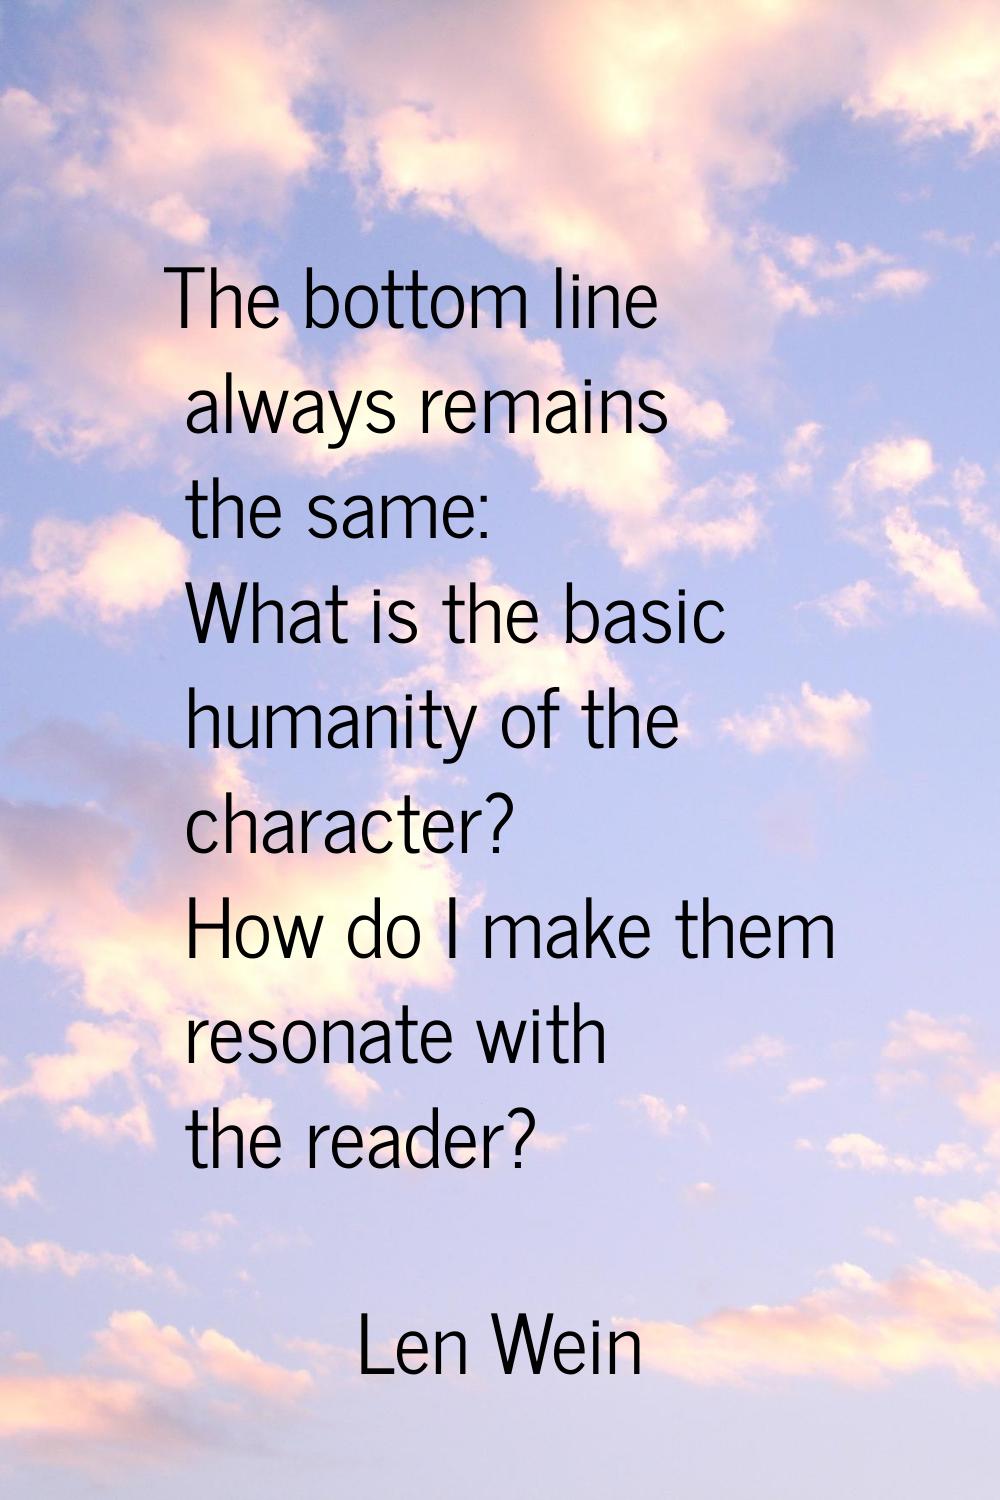 The bottom line always remains the same: What is the basic humanity of the character? How do I make